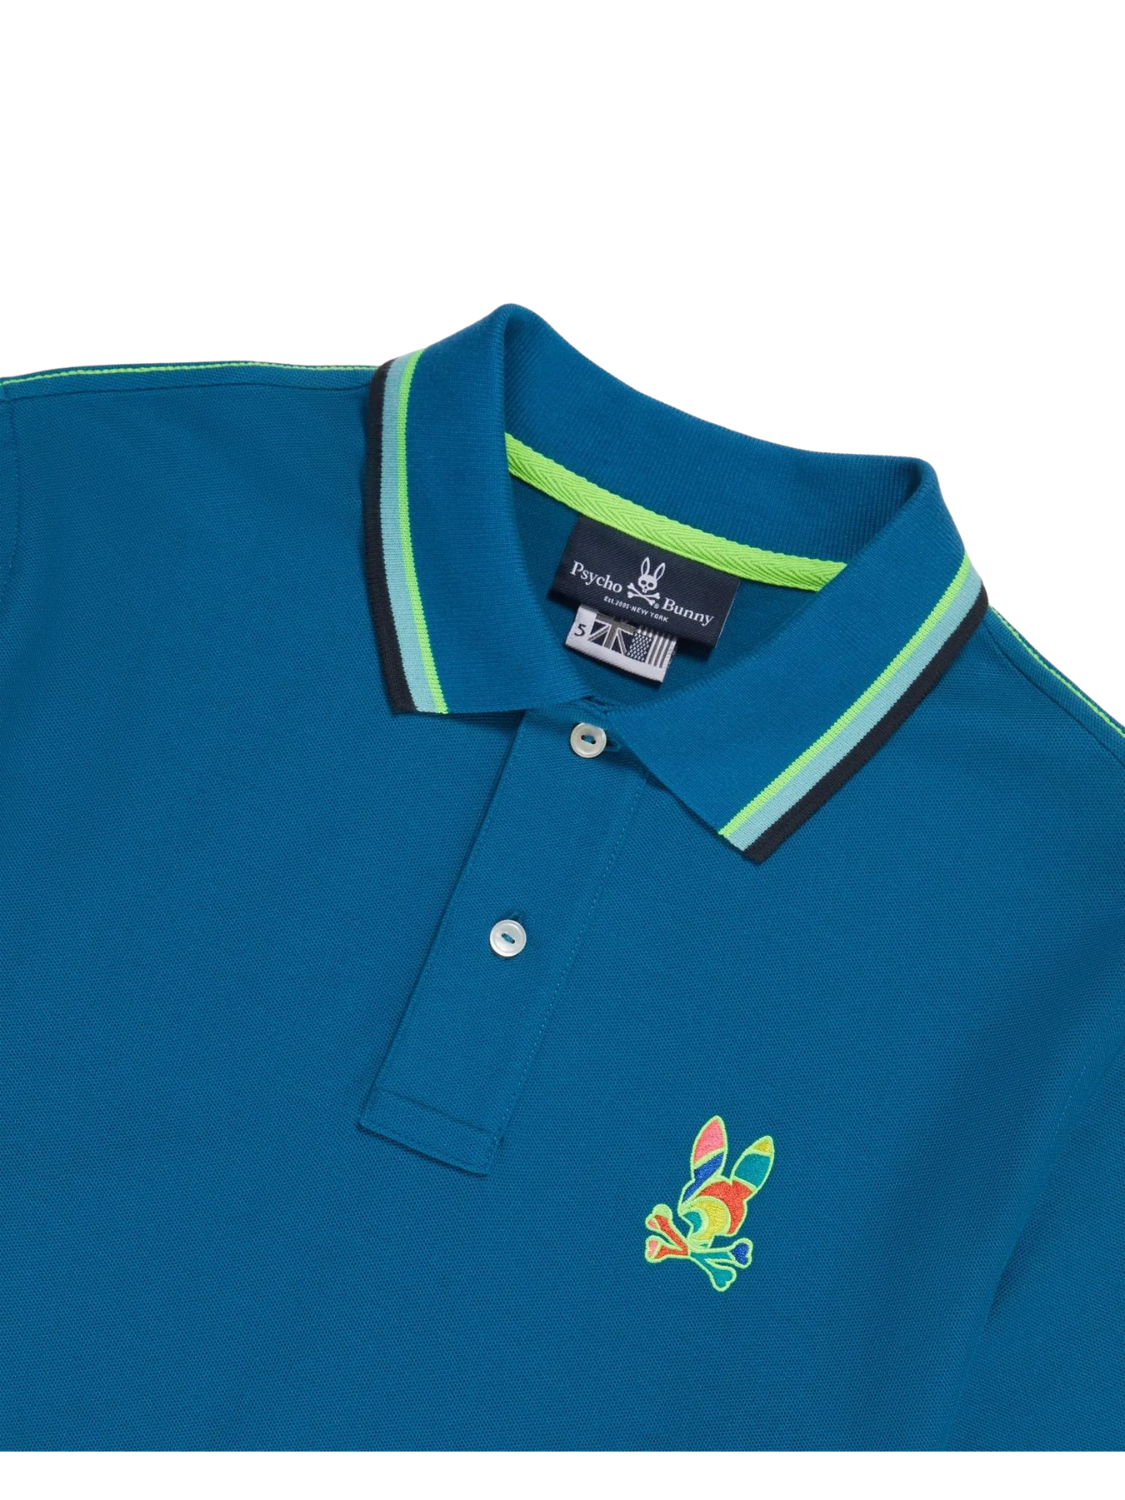 Teal men's Hilsboro fashion polo with contrasting green and navy stripe on sleeve and collar